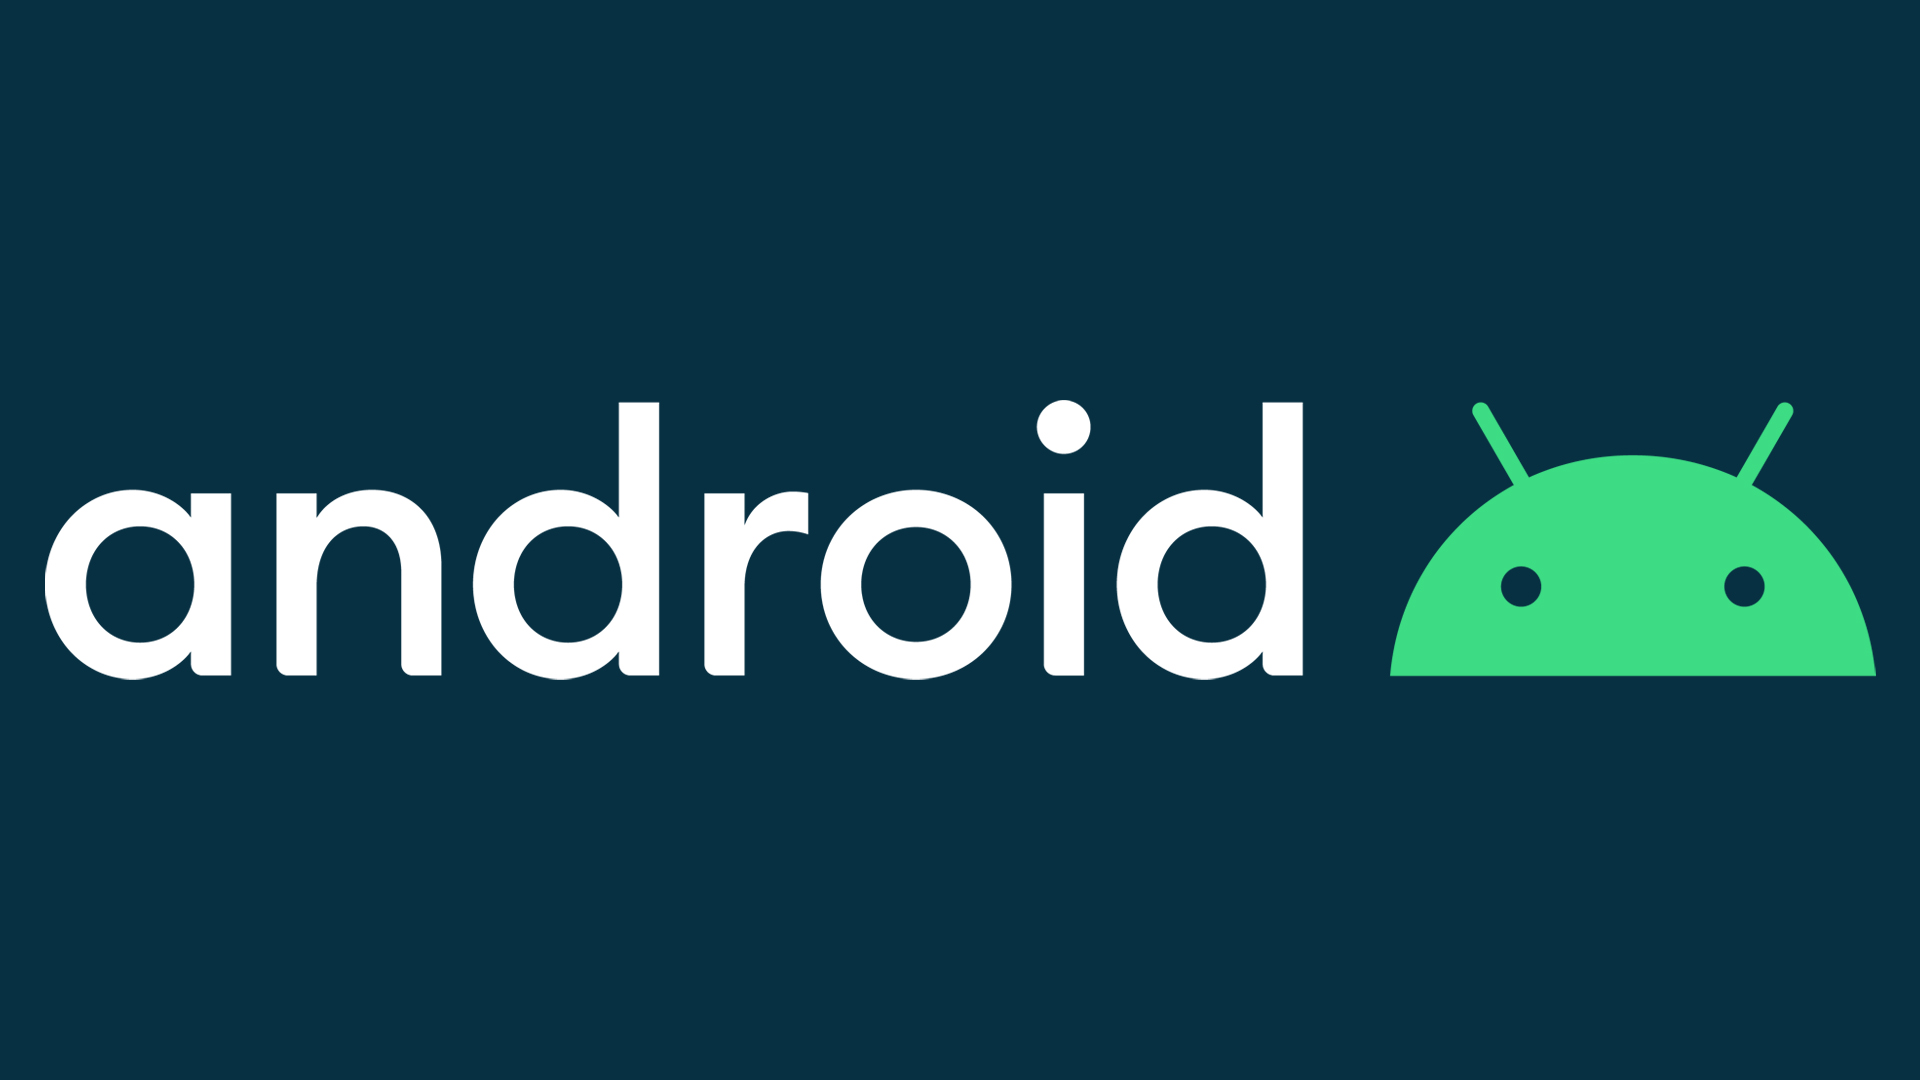 new android logo 2019 robot head navy background